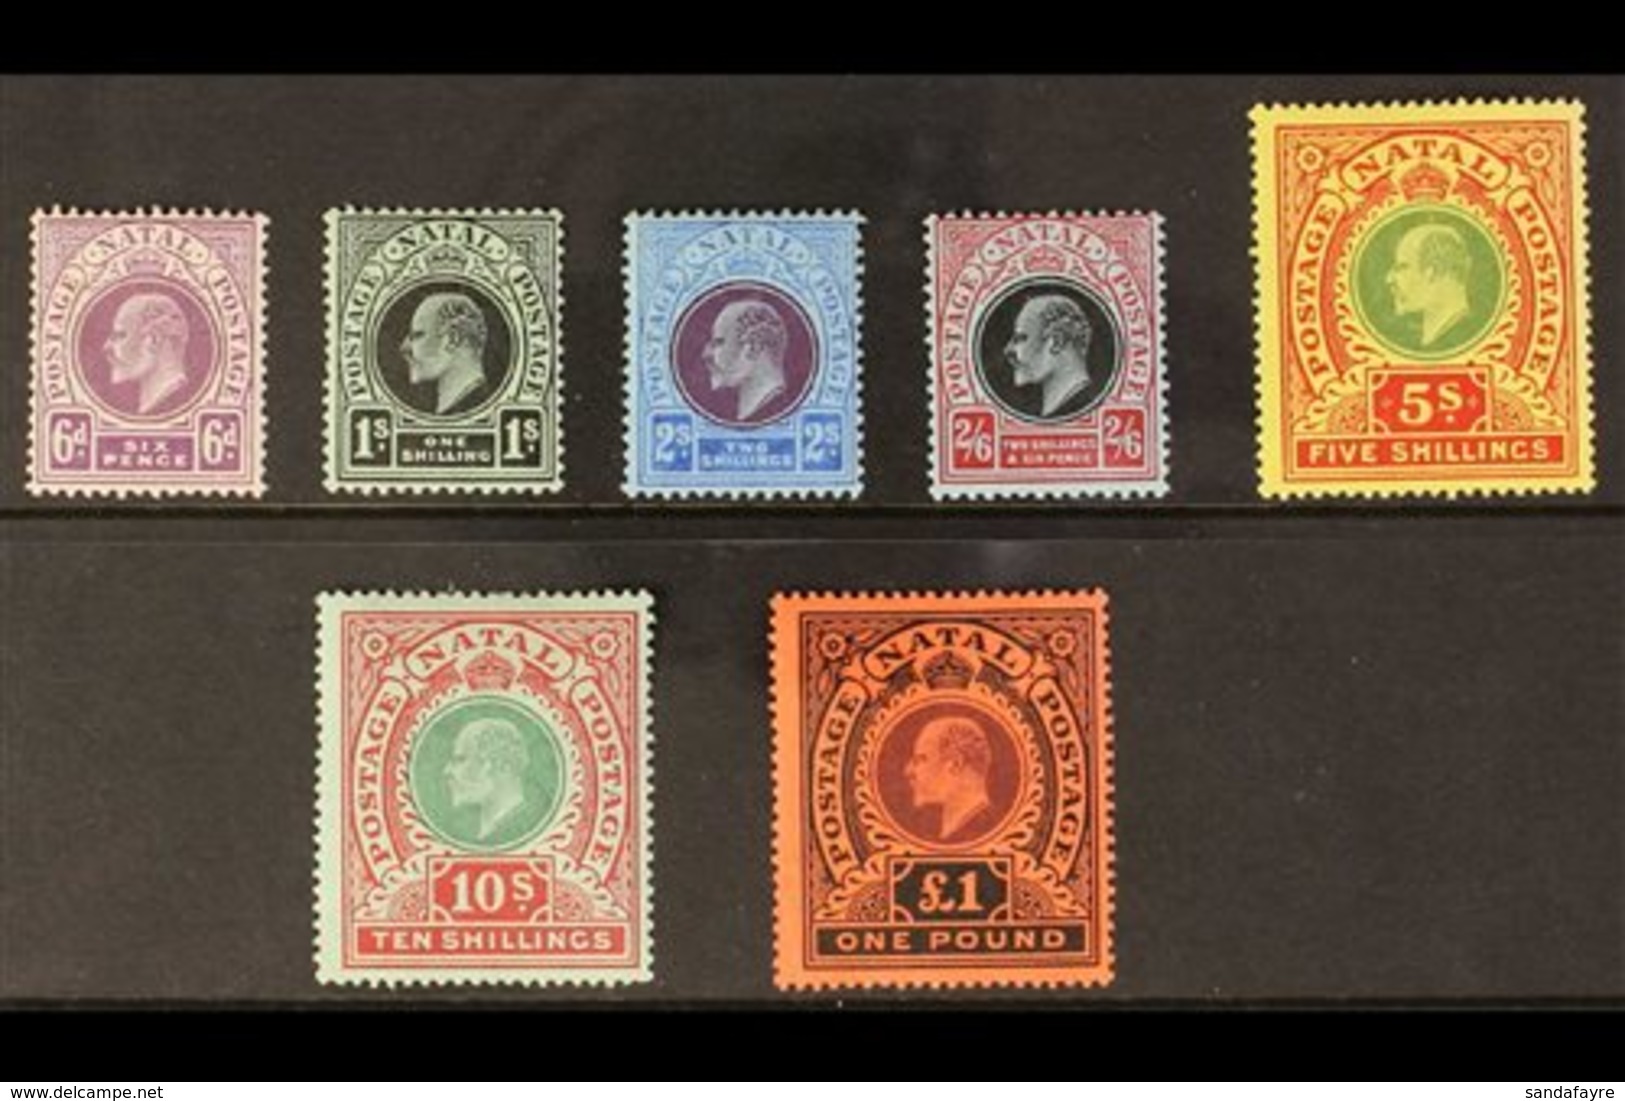 NATAL  1908 - 09 Complete Set Inscribed "Postage Postage", SG 165/71, Very Fine Mint. (7 Stamps) For More Images, Please - Ohne Zuordnung